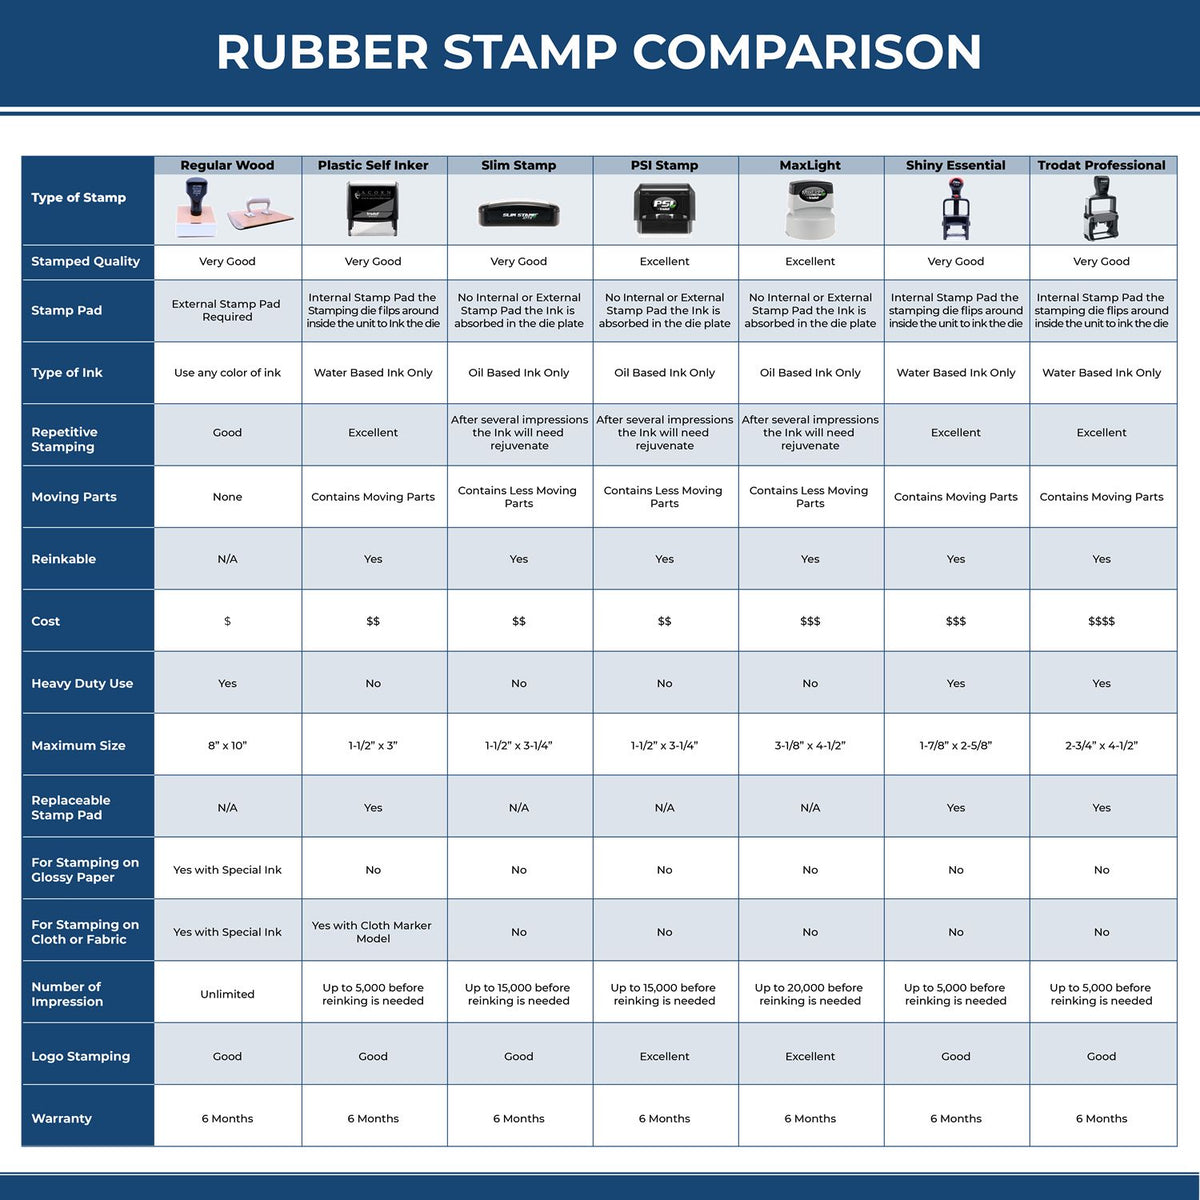 A comparison chart for the different types of mount models available for the Heavy-Duty Puerto Rico Rectangular Notary Stamp.